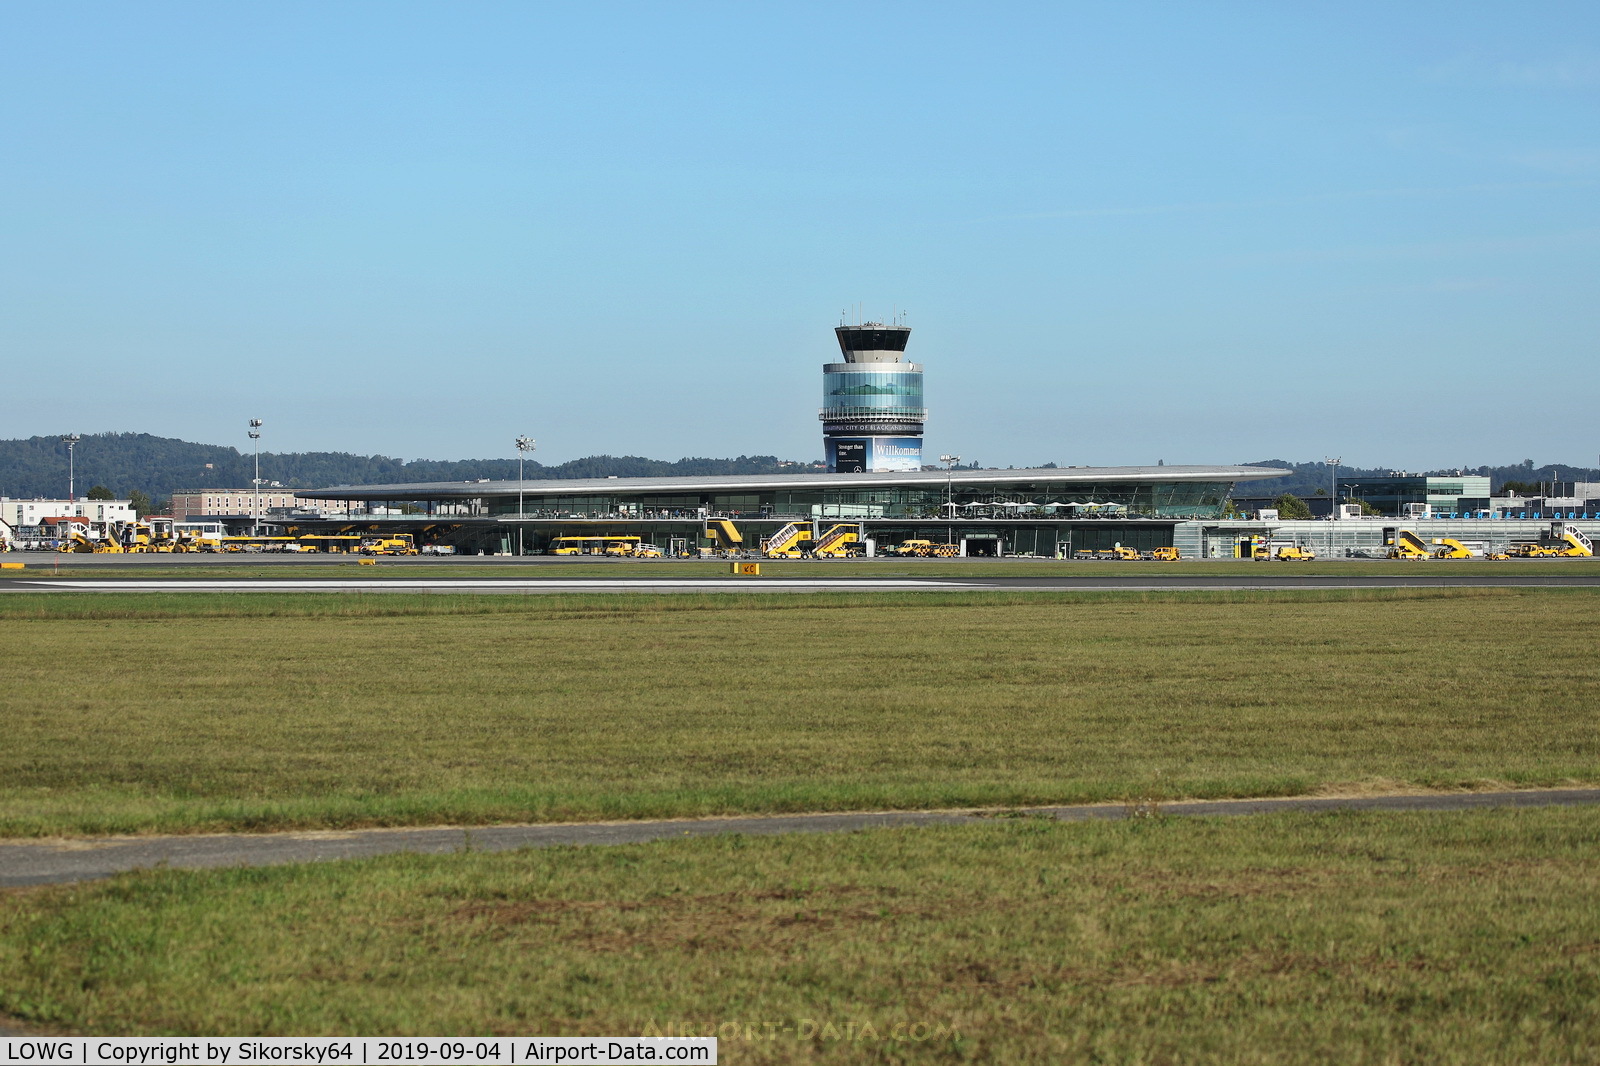 Graz Airport, Graz Austria (LOWG) - The Tower and  Apron.